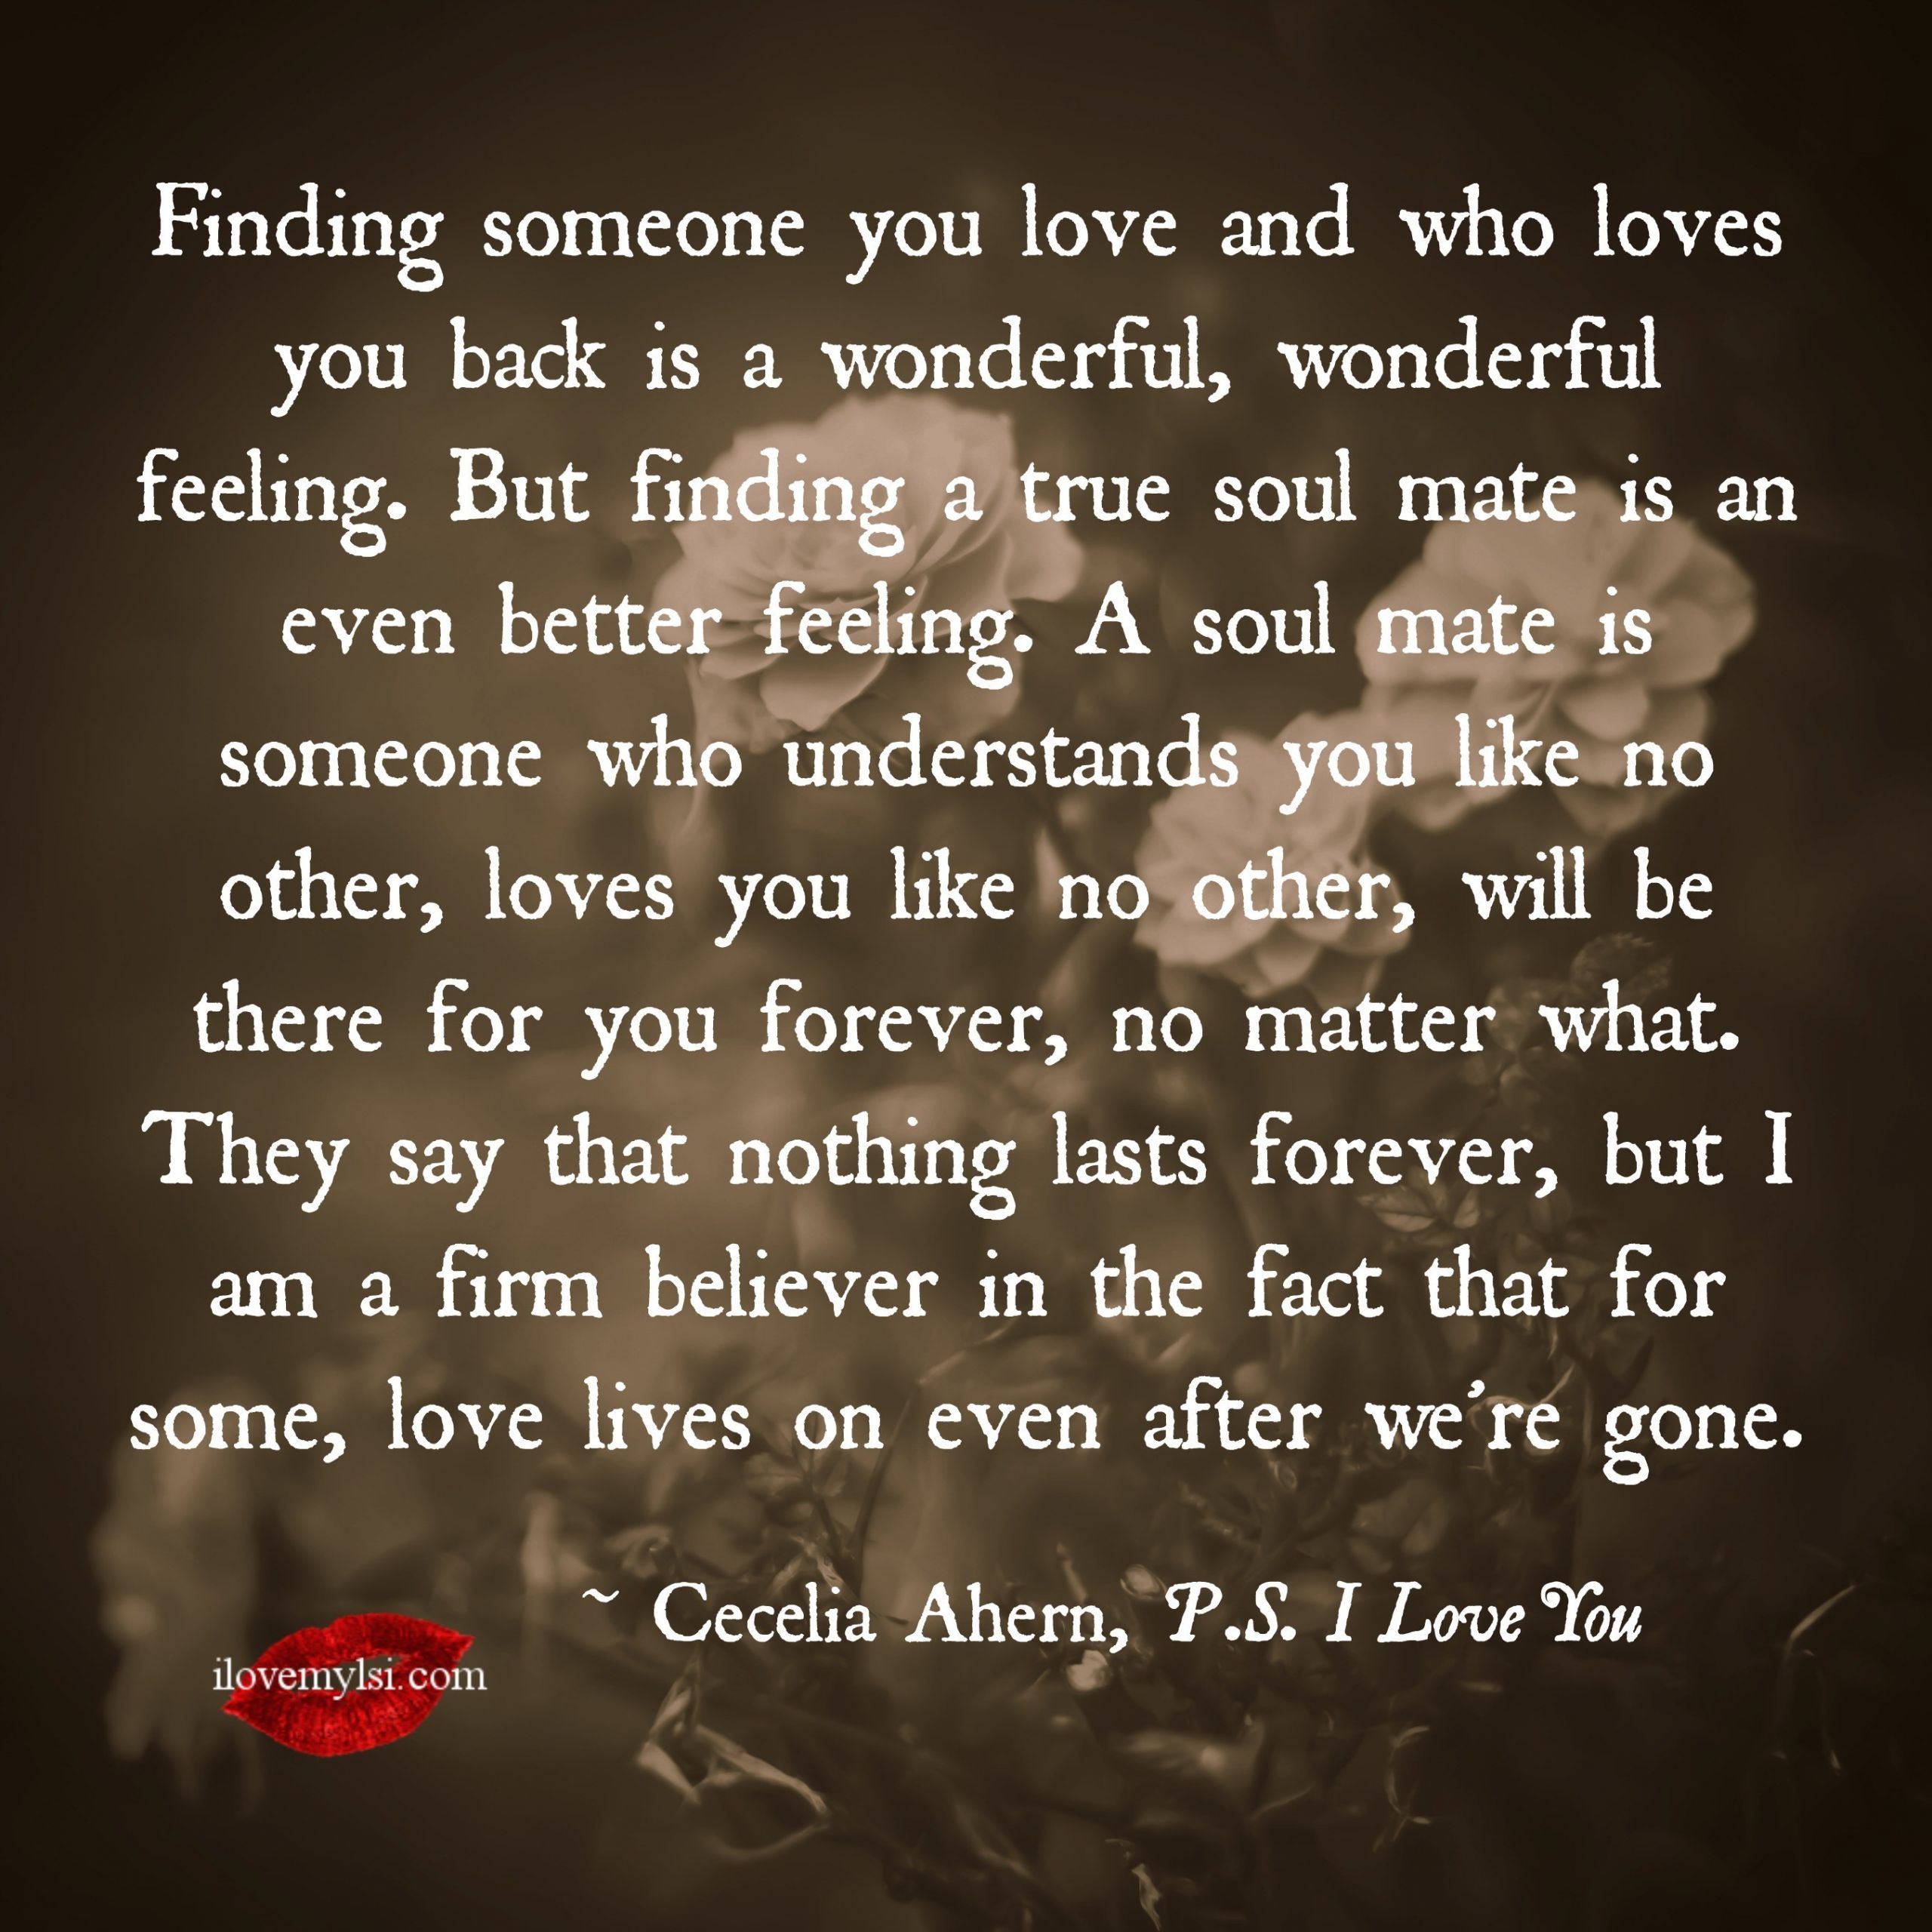 Newly Found Love Quotes
 The 25 Most Romantic Love Quotes You Will Ever Read